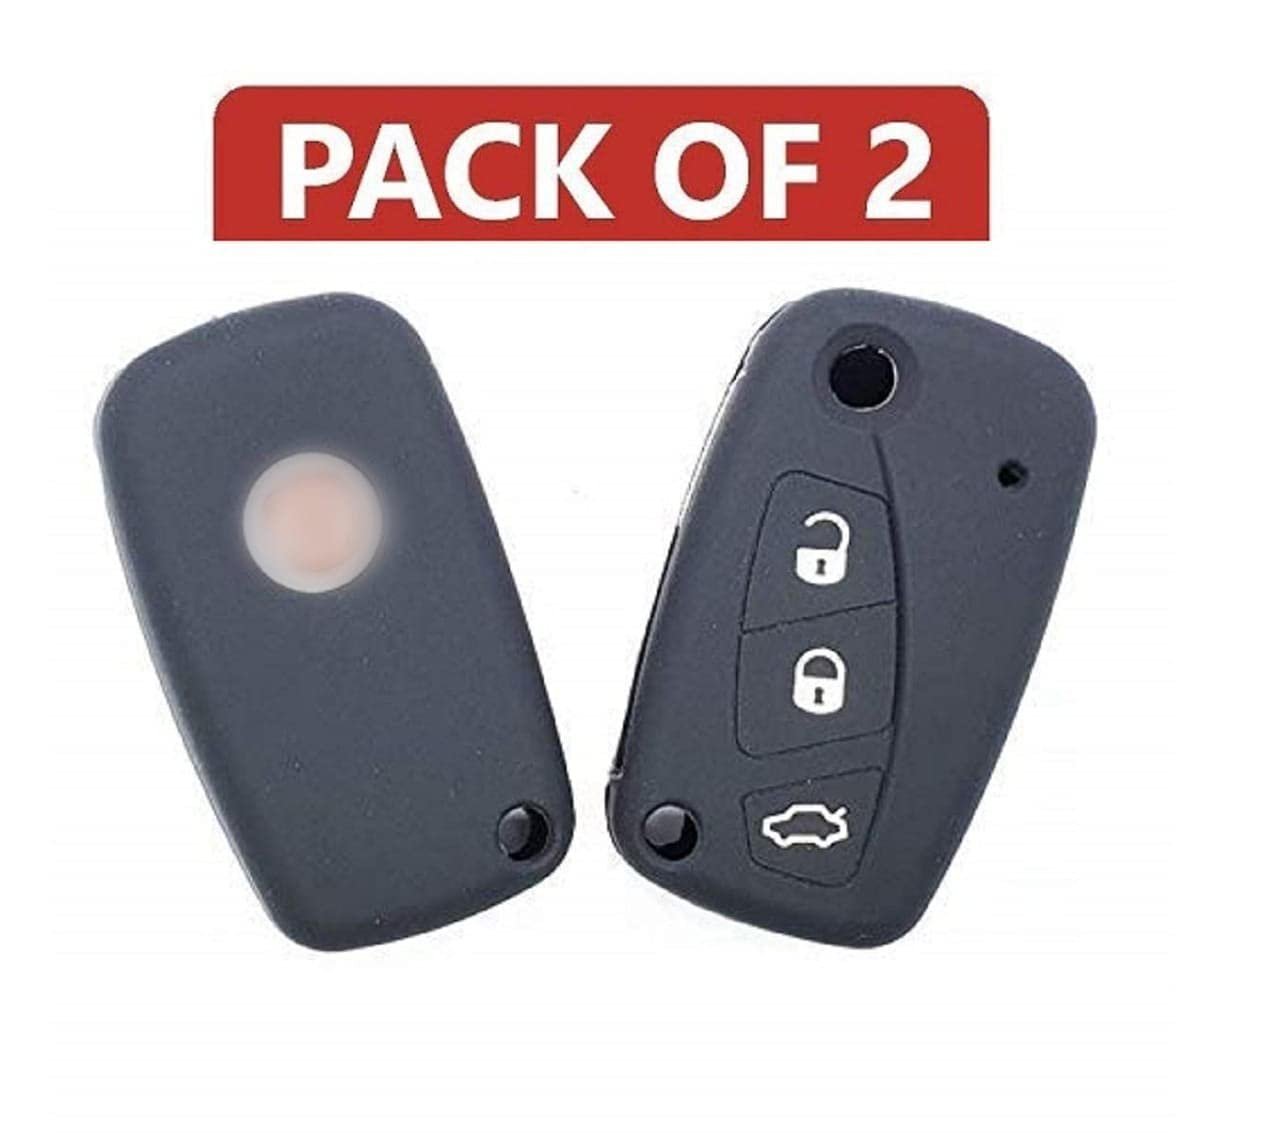 Silicone Key Cover For Fiat lenia/Punto Flip Keys (Applicable For Both 2/3 Button Flip Keys Pack of 2) Image